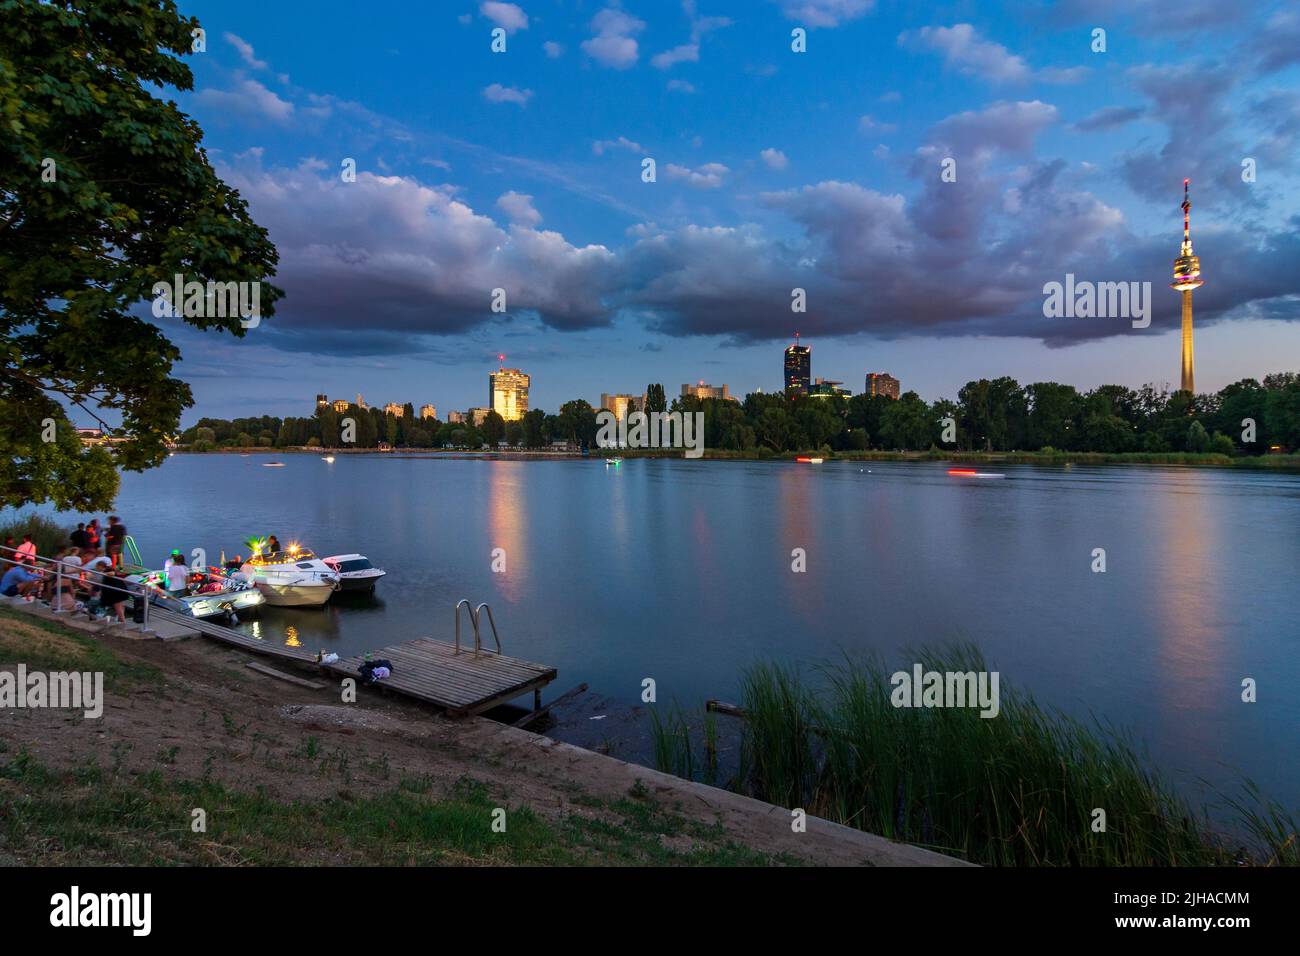 Wien, Vienna: oxbow lake Alte Donau (Old Danube), sunset, privat party on boats, IZD Tower, DC Tower 1, Donauturm (Danube Tower) in 22. Donaustadt, Wi Stock Photo